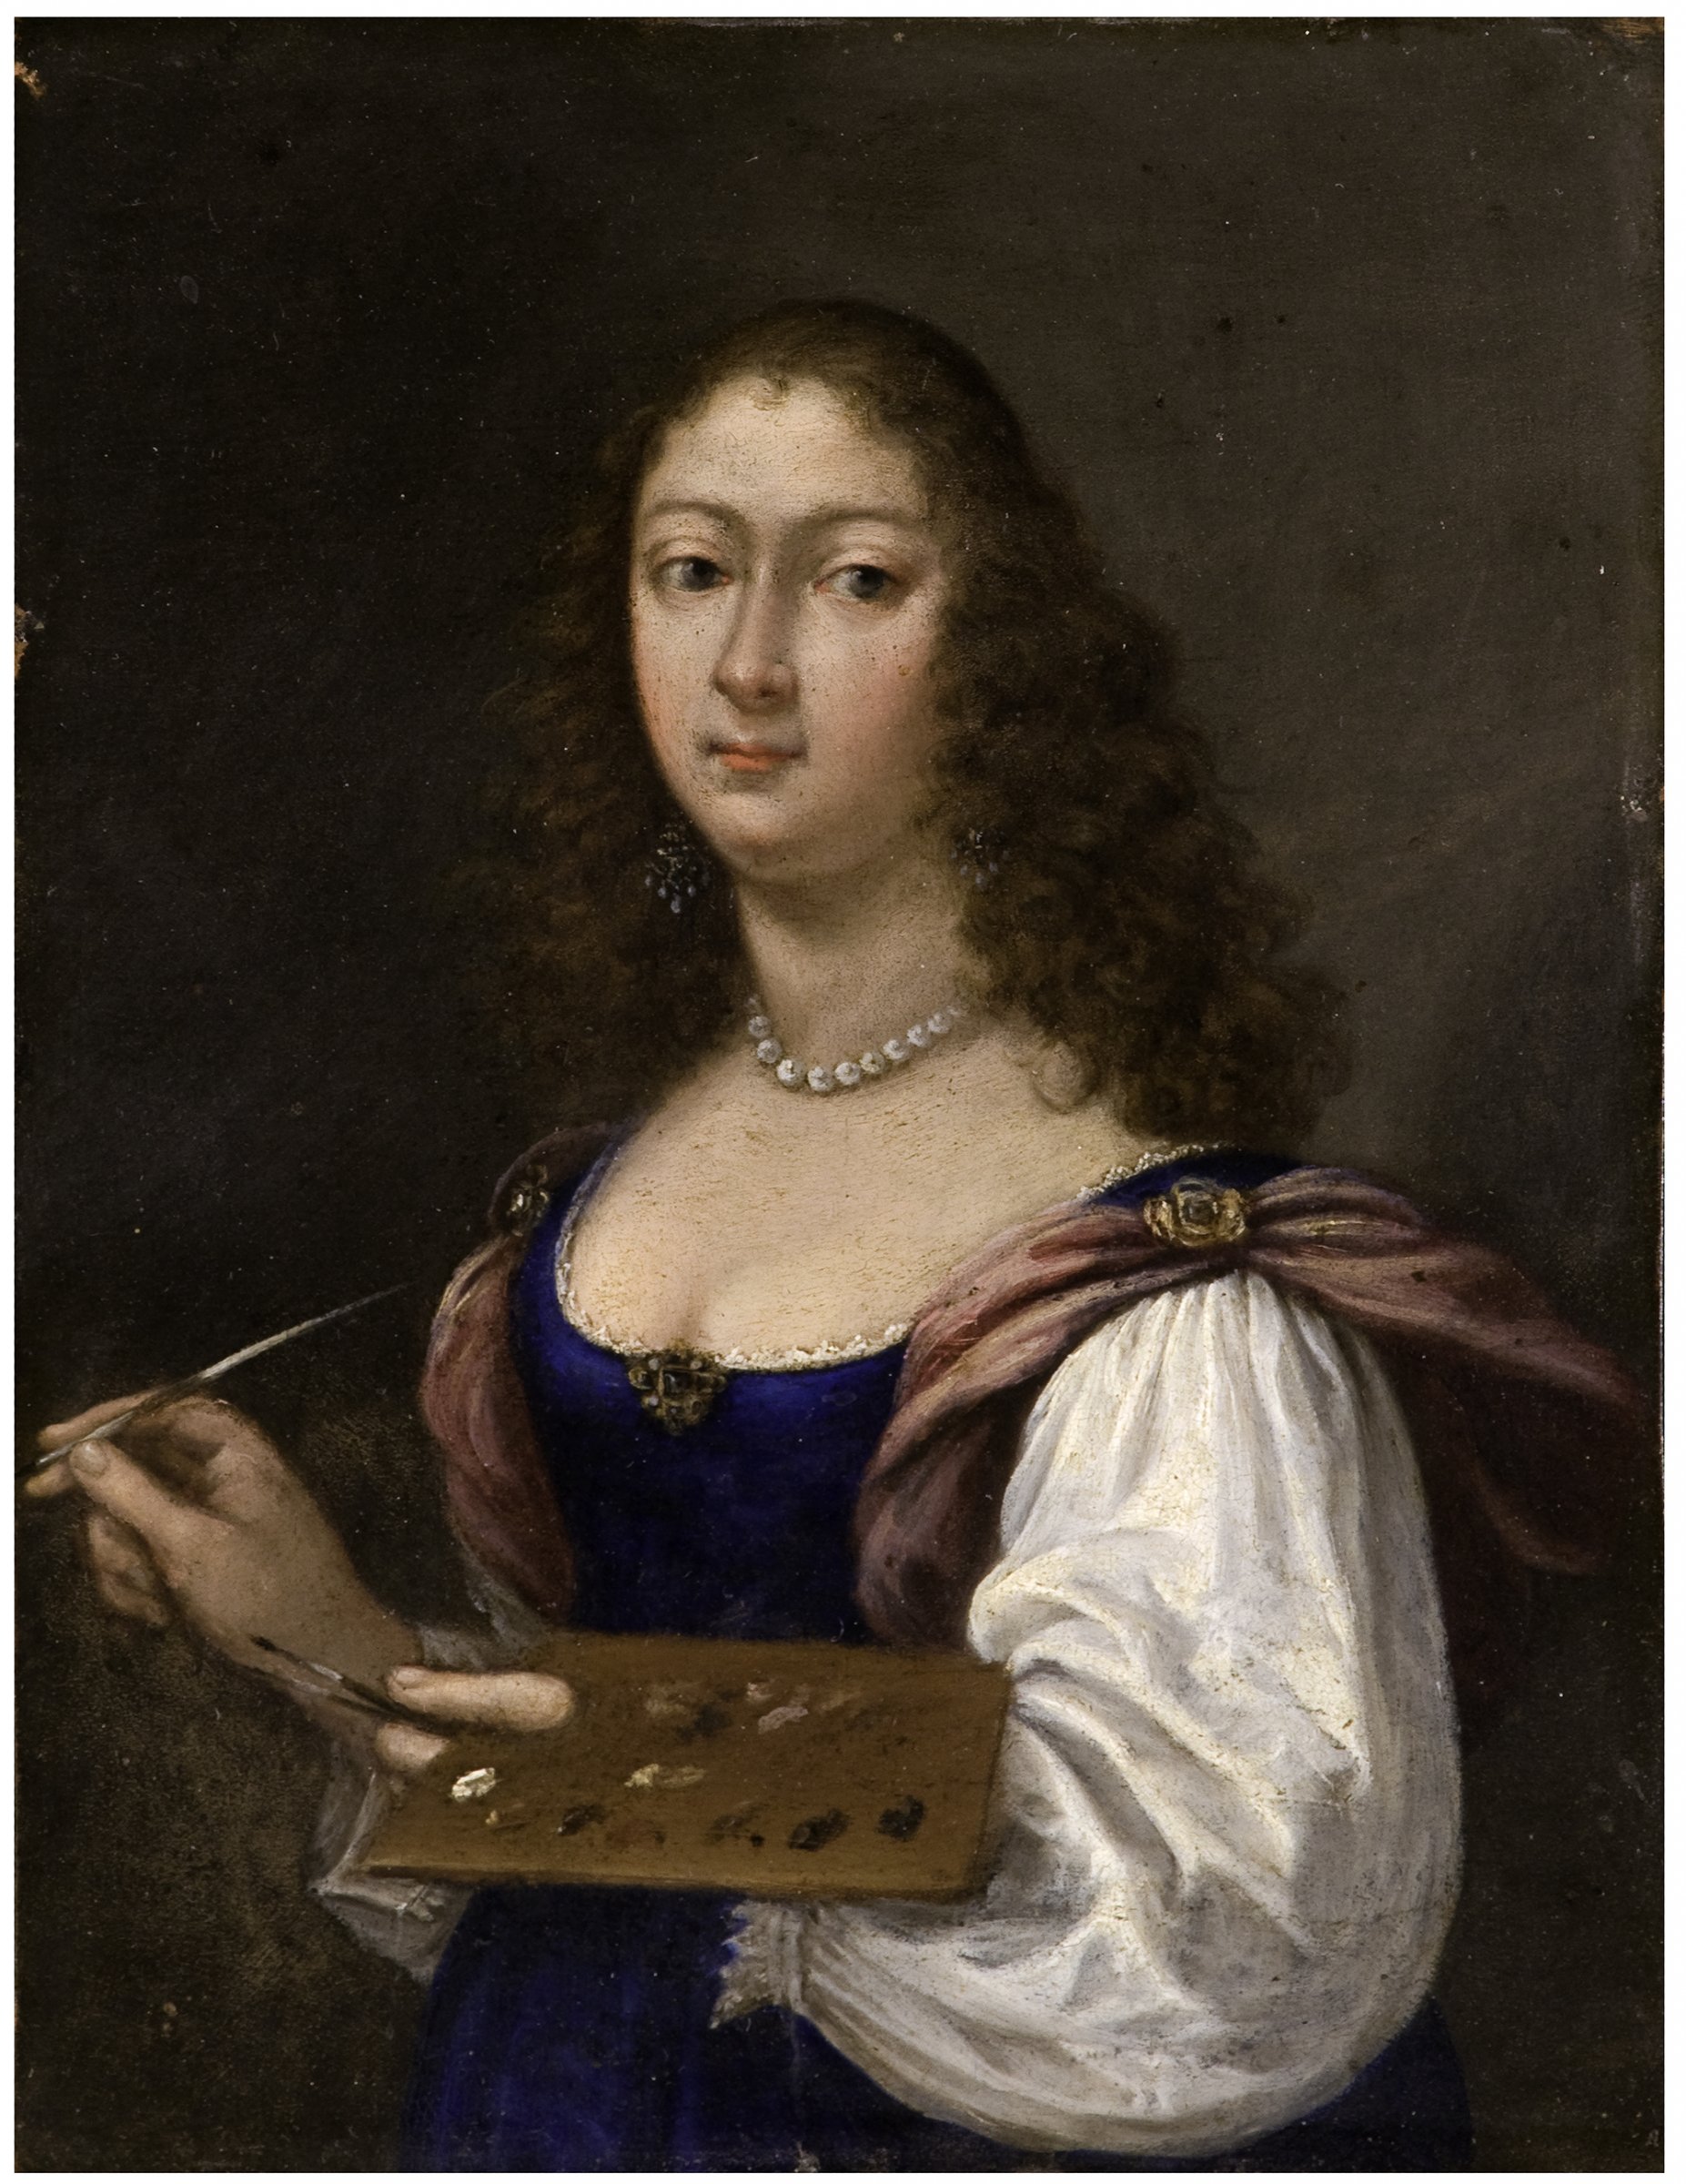 A half length portrait of a young woman, Elisabetta Sirani, holding a palate and paintbrush.